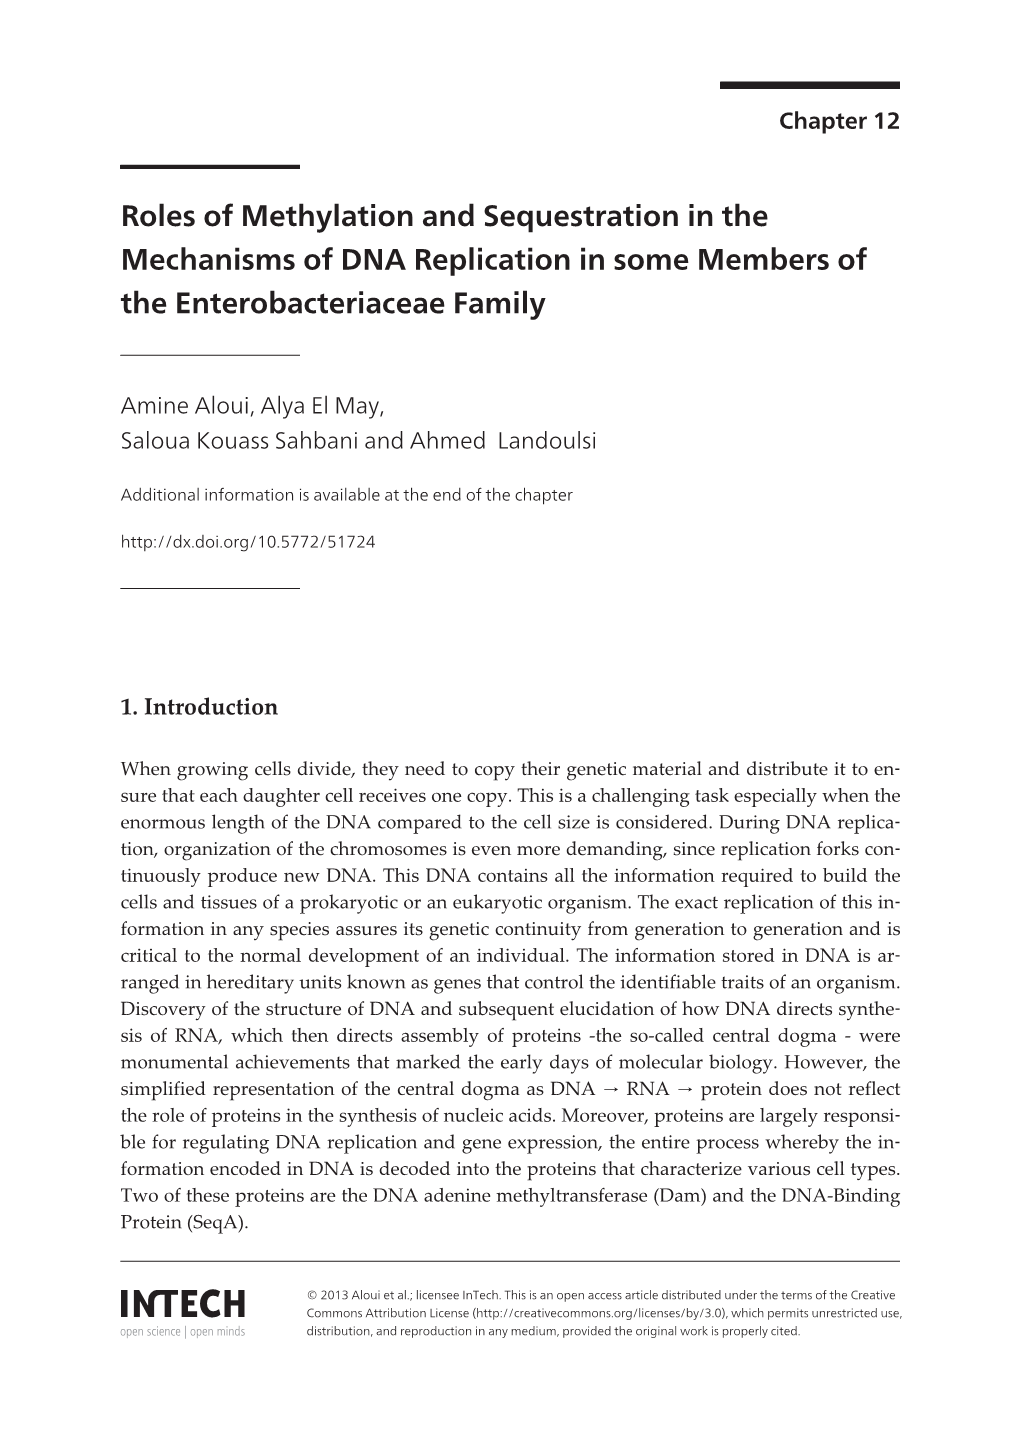 Roles of Methylation and Sequestration in the Mechanisms of DNA Replication in Some Members of the Enterobacteriaceae Family